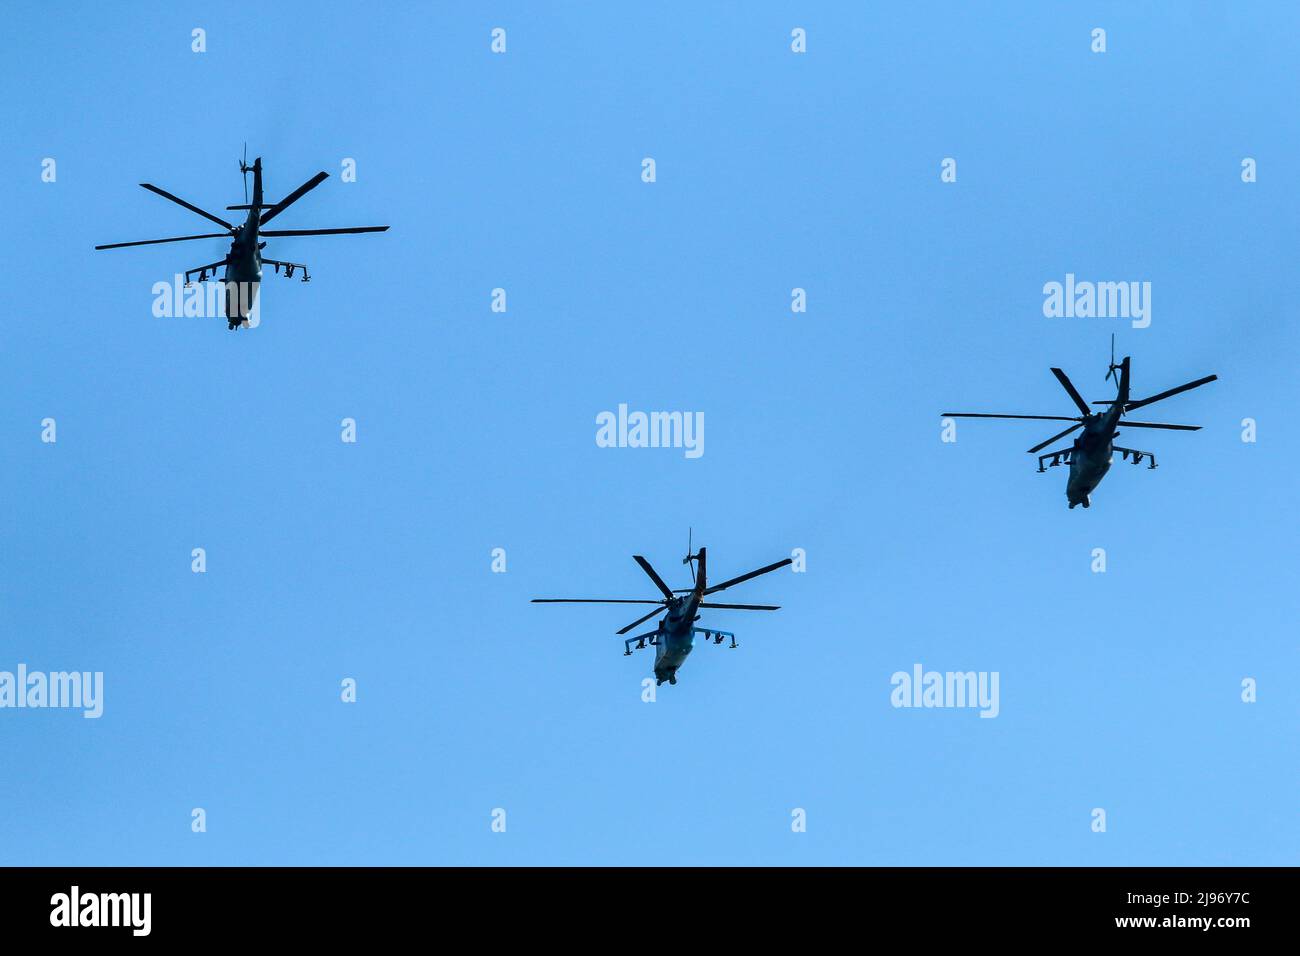 The flight of three soviet battle helicopters, type MIL Mi-24 flying on the bright blue sky. Stock Photo